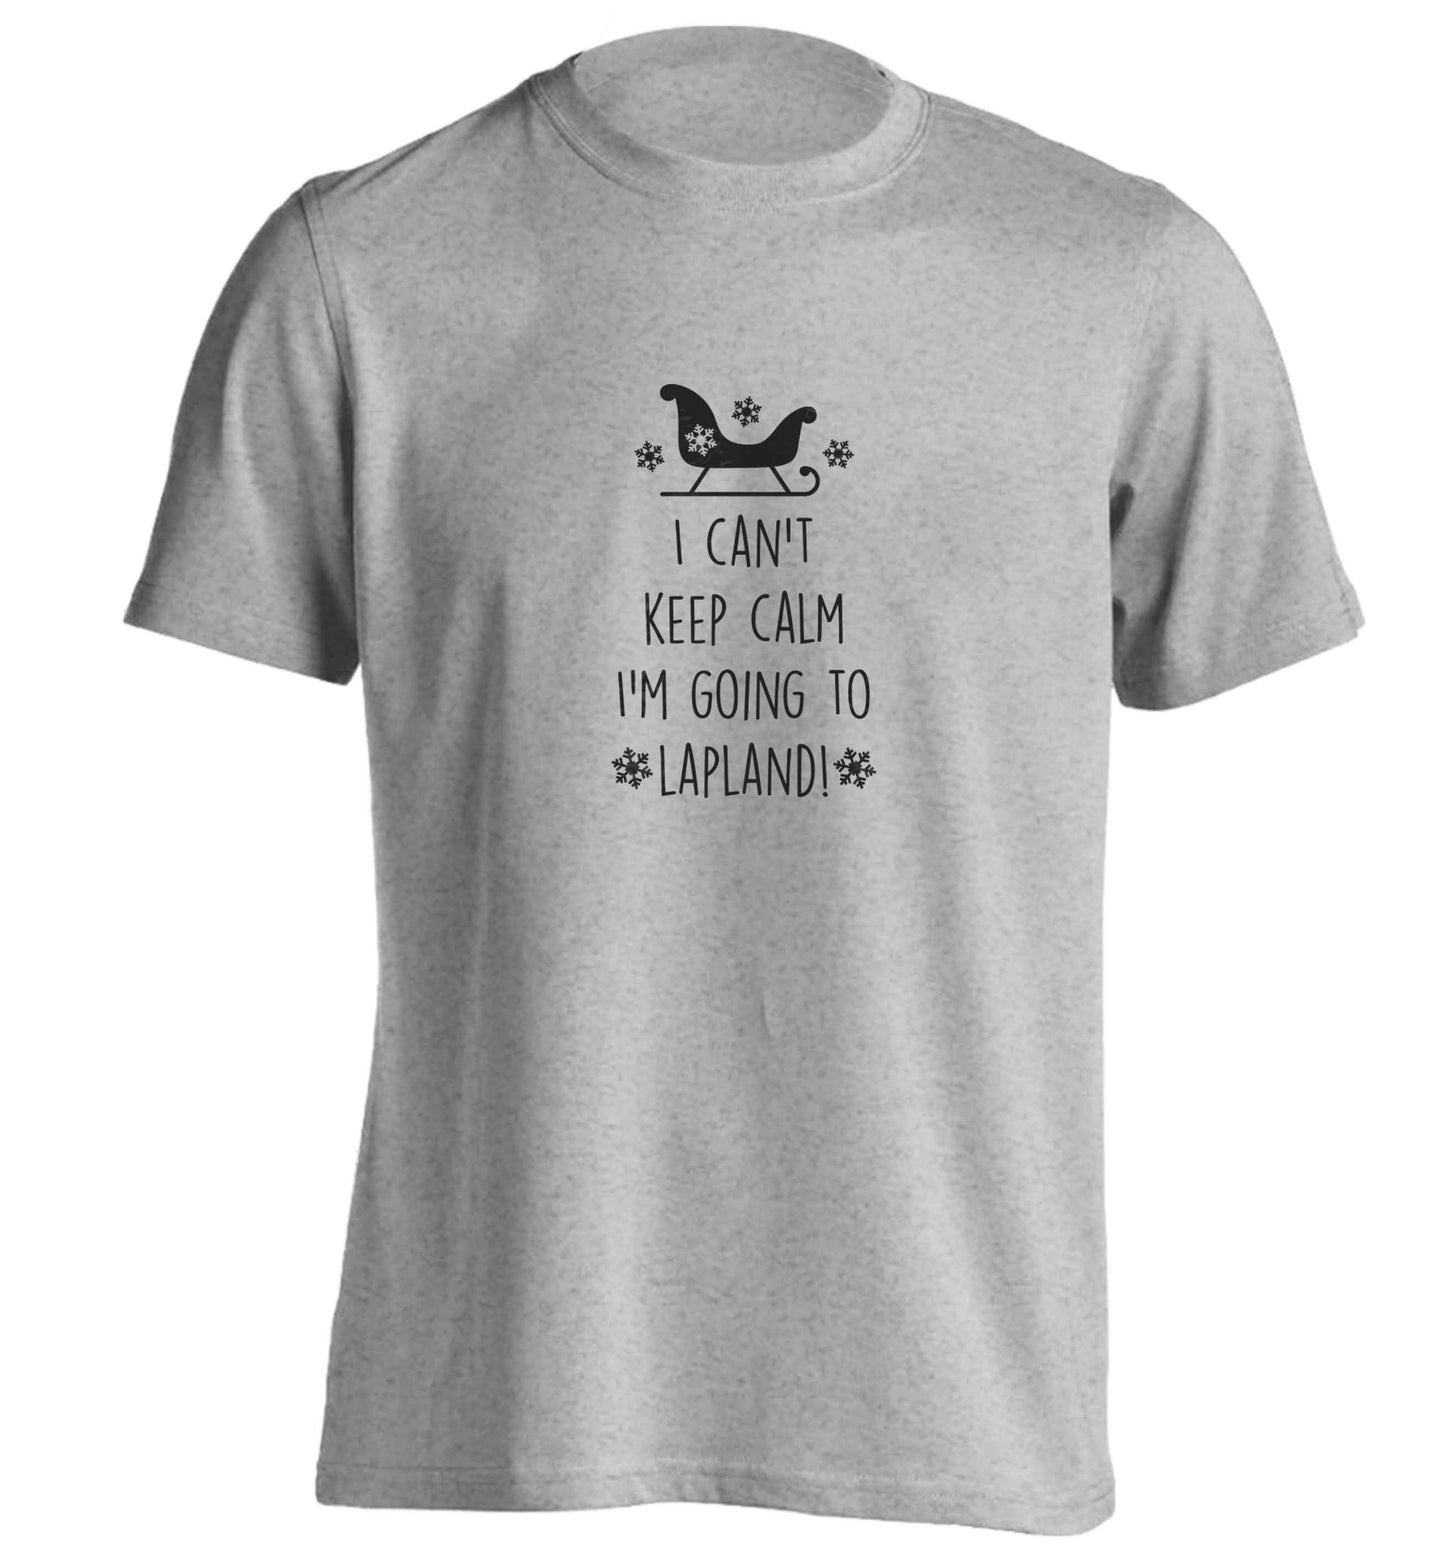 I can't keep calm I'm going to Lapland adults unisex grey Tshirt 2XL